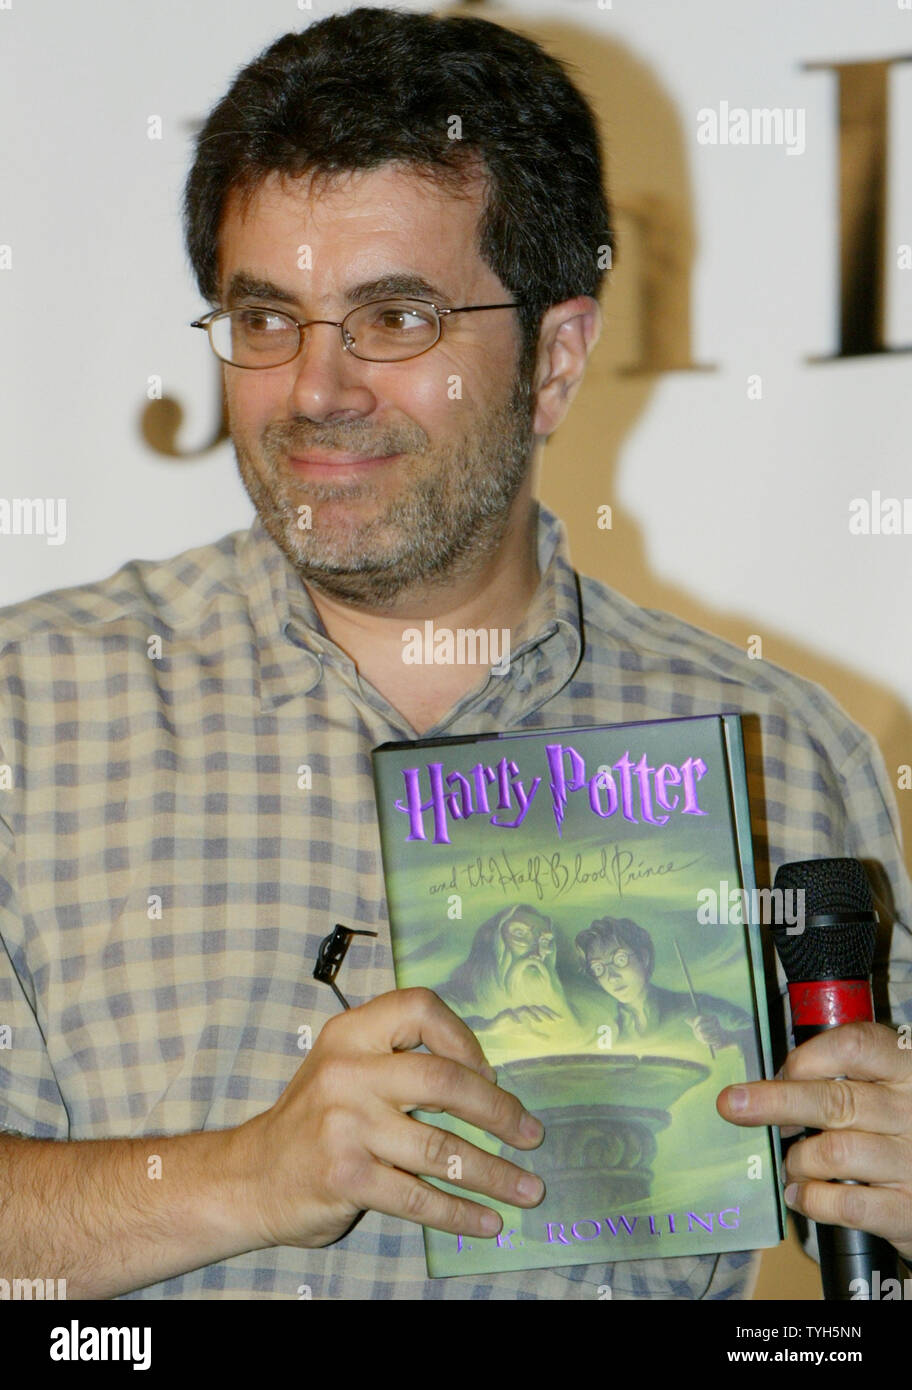 Steve Roggio, CEO of Barnes and Nobel, holds up a copy of  J.K Rowling's ' Harry Potter and the Half-Blood Prince' on July 15, 2005 in New York City. Riggio was on hand to introduce Jim Dale, the voice of the audio books, who read from the popular children's books.  (UPI Photo/Monika Graff) Stock Photo